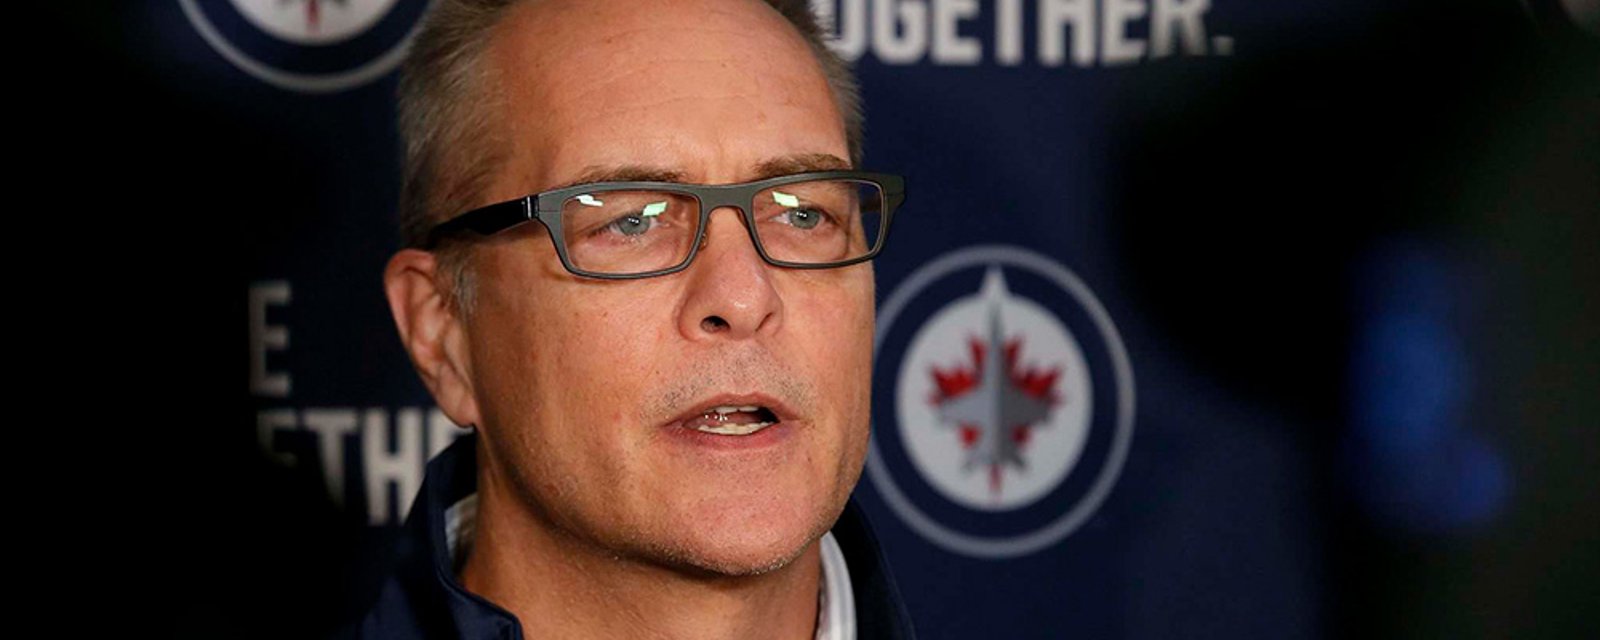 Paul Maurice confirms unfortunate injury news for Winnipeg Jets ahead of playoff opener 